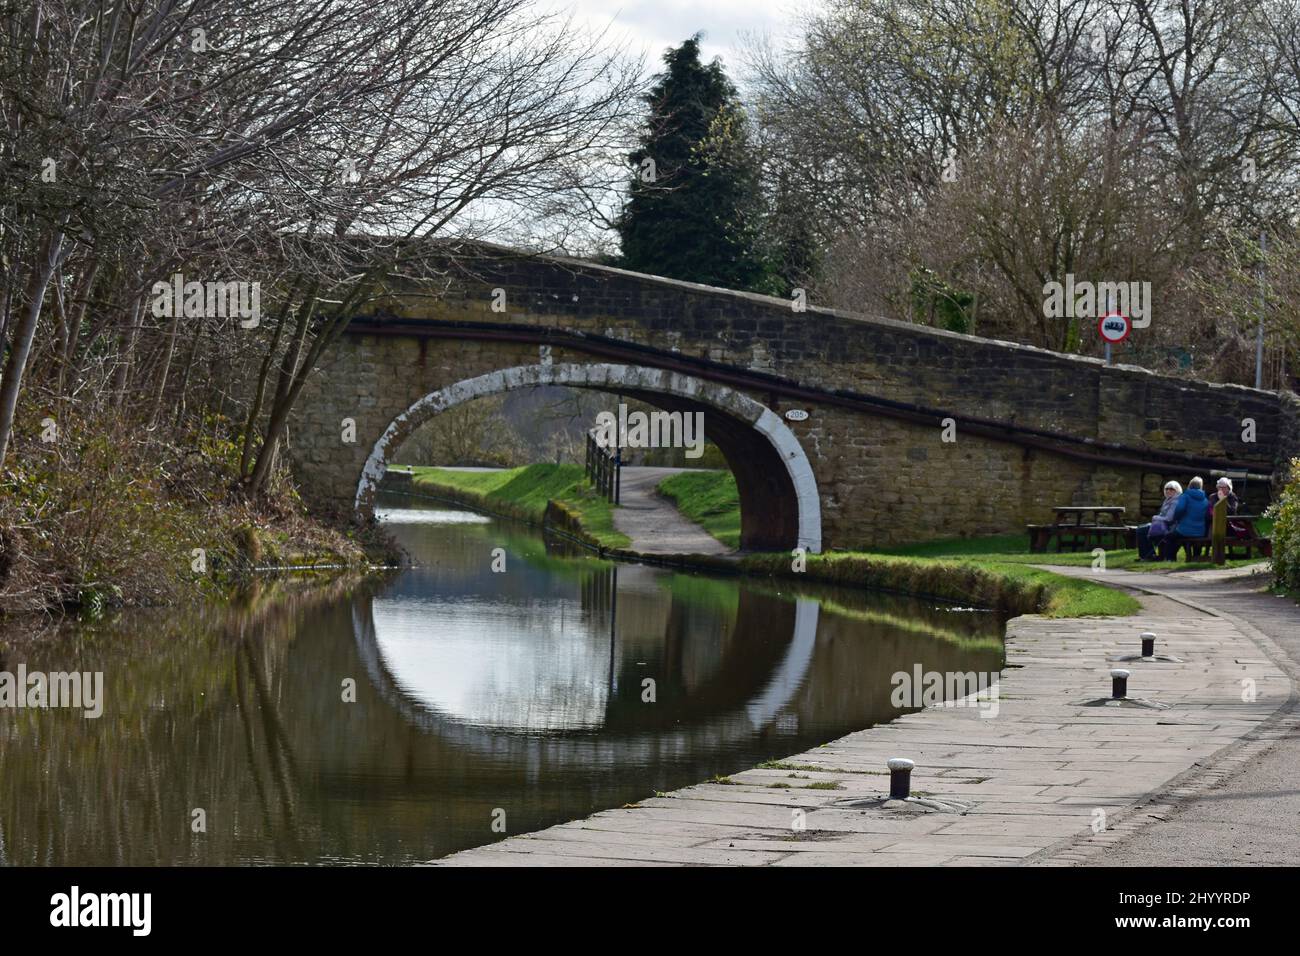 People sitting by canal bridge, Leeds and Liverpool canal, Dowley gap, Bingley Stock Photo